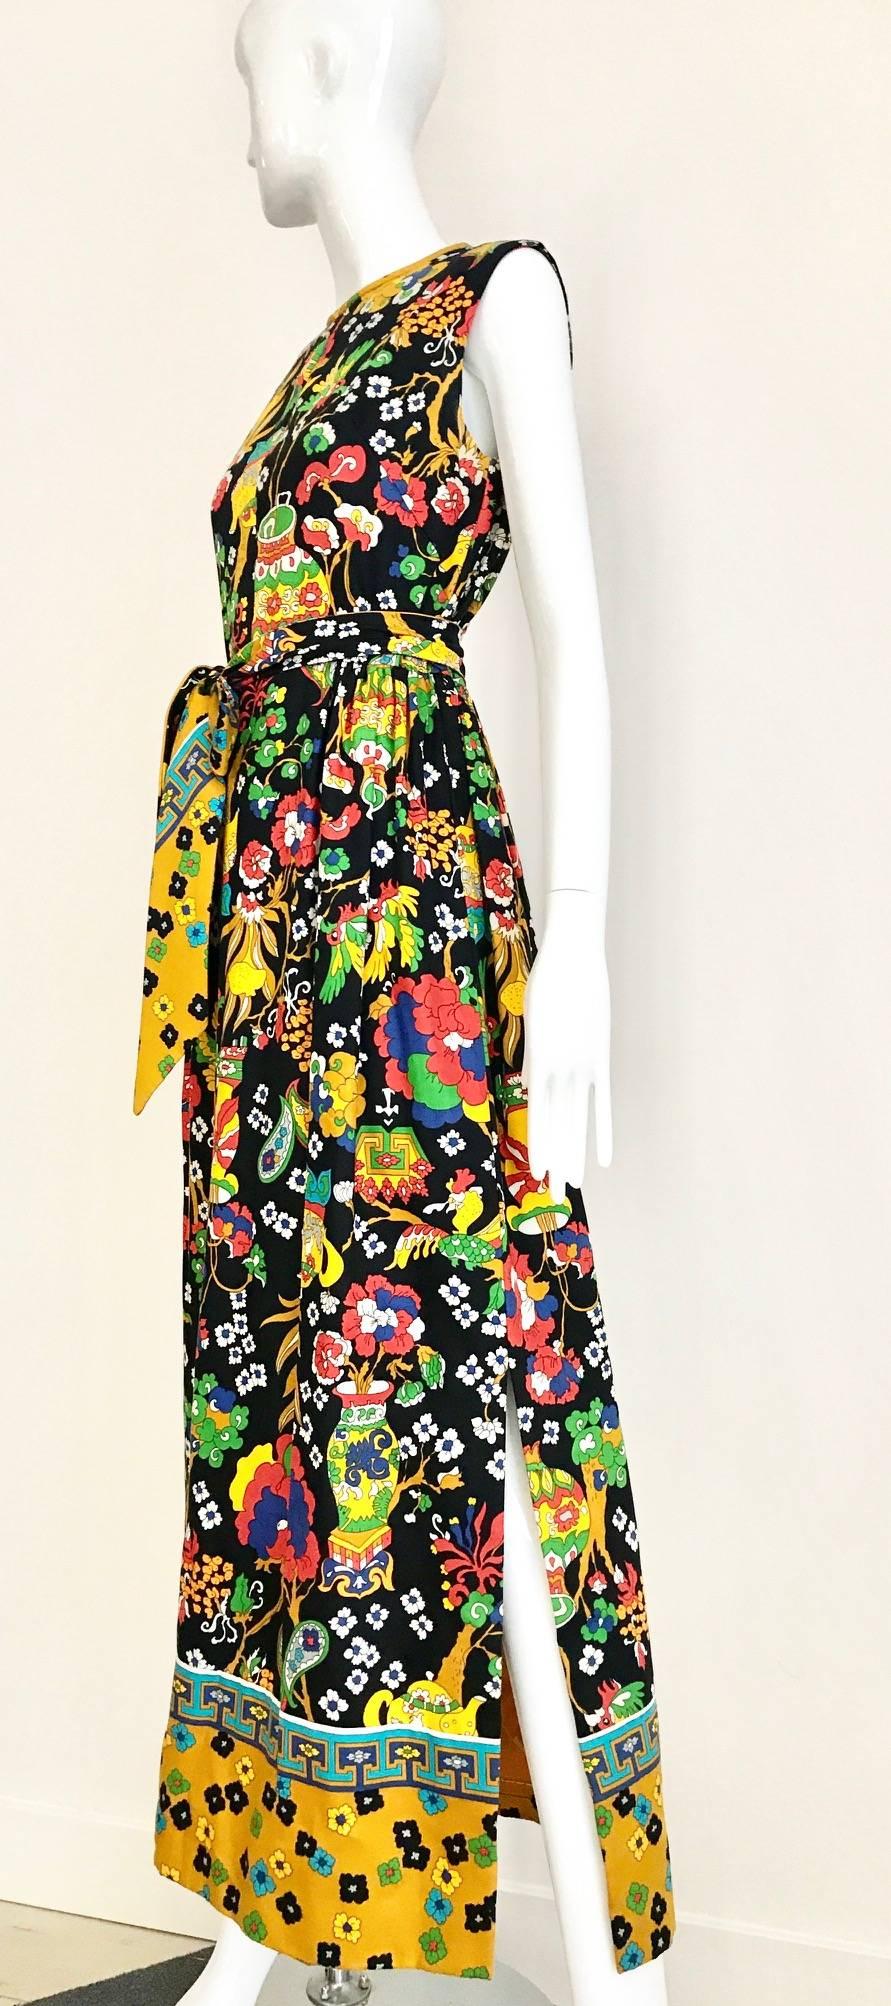 Vintage Late 1960s and early 1970s Multi Color Bold novelty Print Sleeveless Cotton Maxi Summer Dress. Featuring Bold Print of birds, flowers and trees in yellow, green, black, red, and blue. Dress comes with reversible two different color of prints